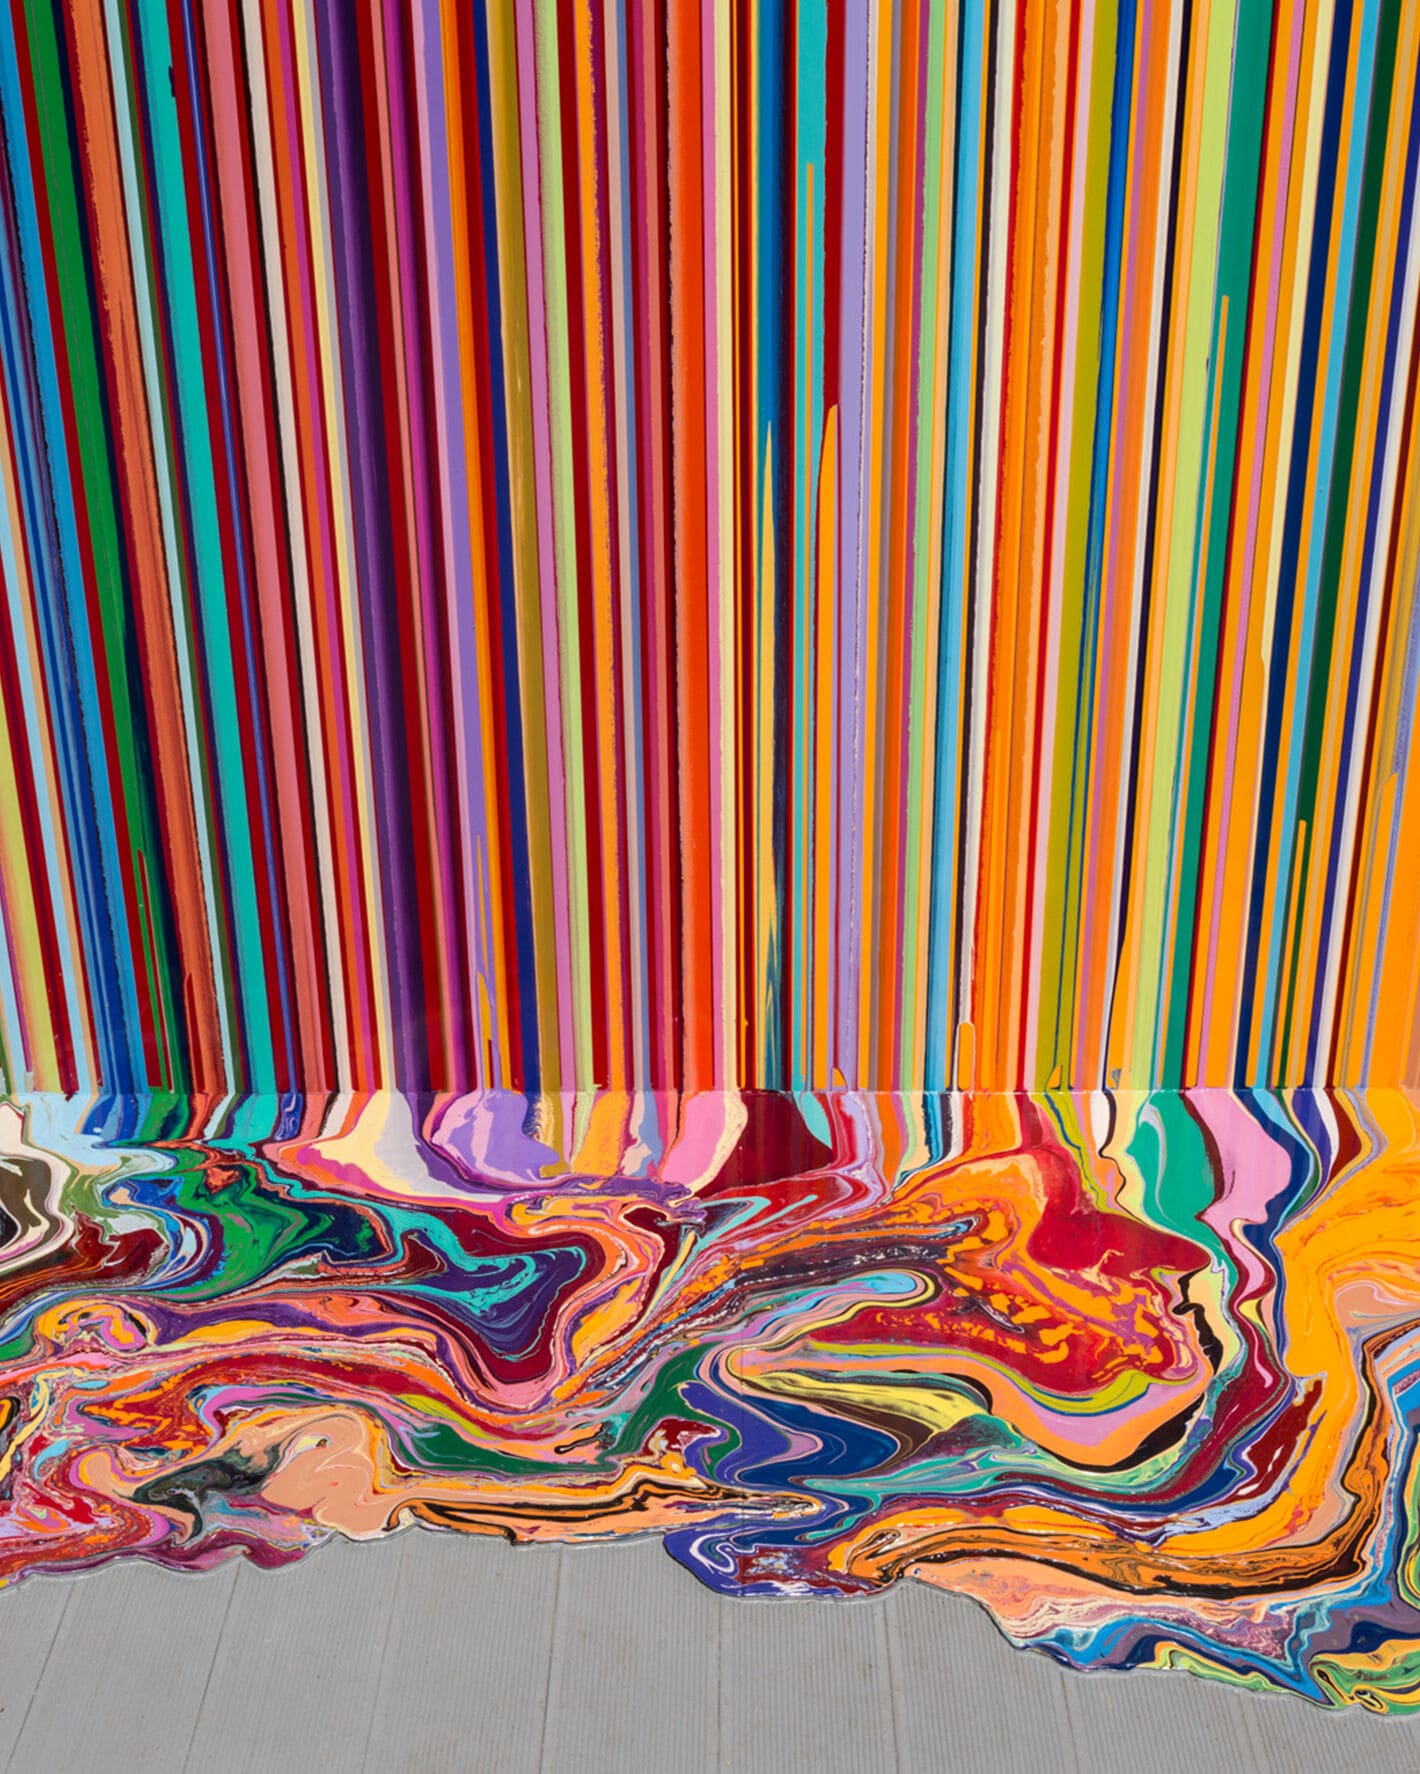 WIDE ACRES OF TIME by Ian Davenport, 2017